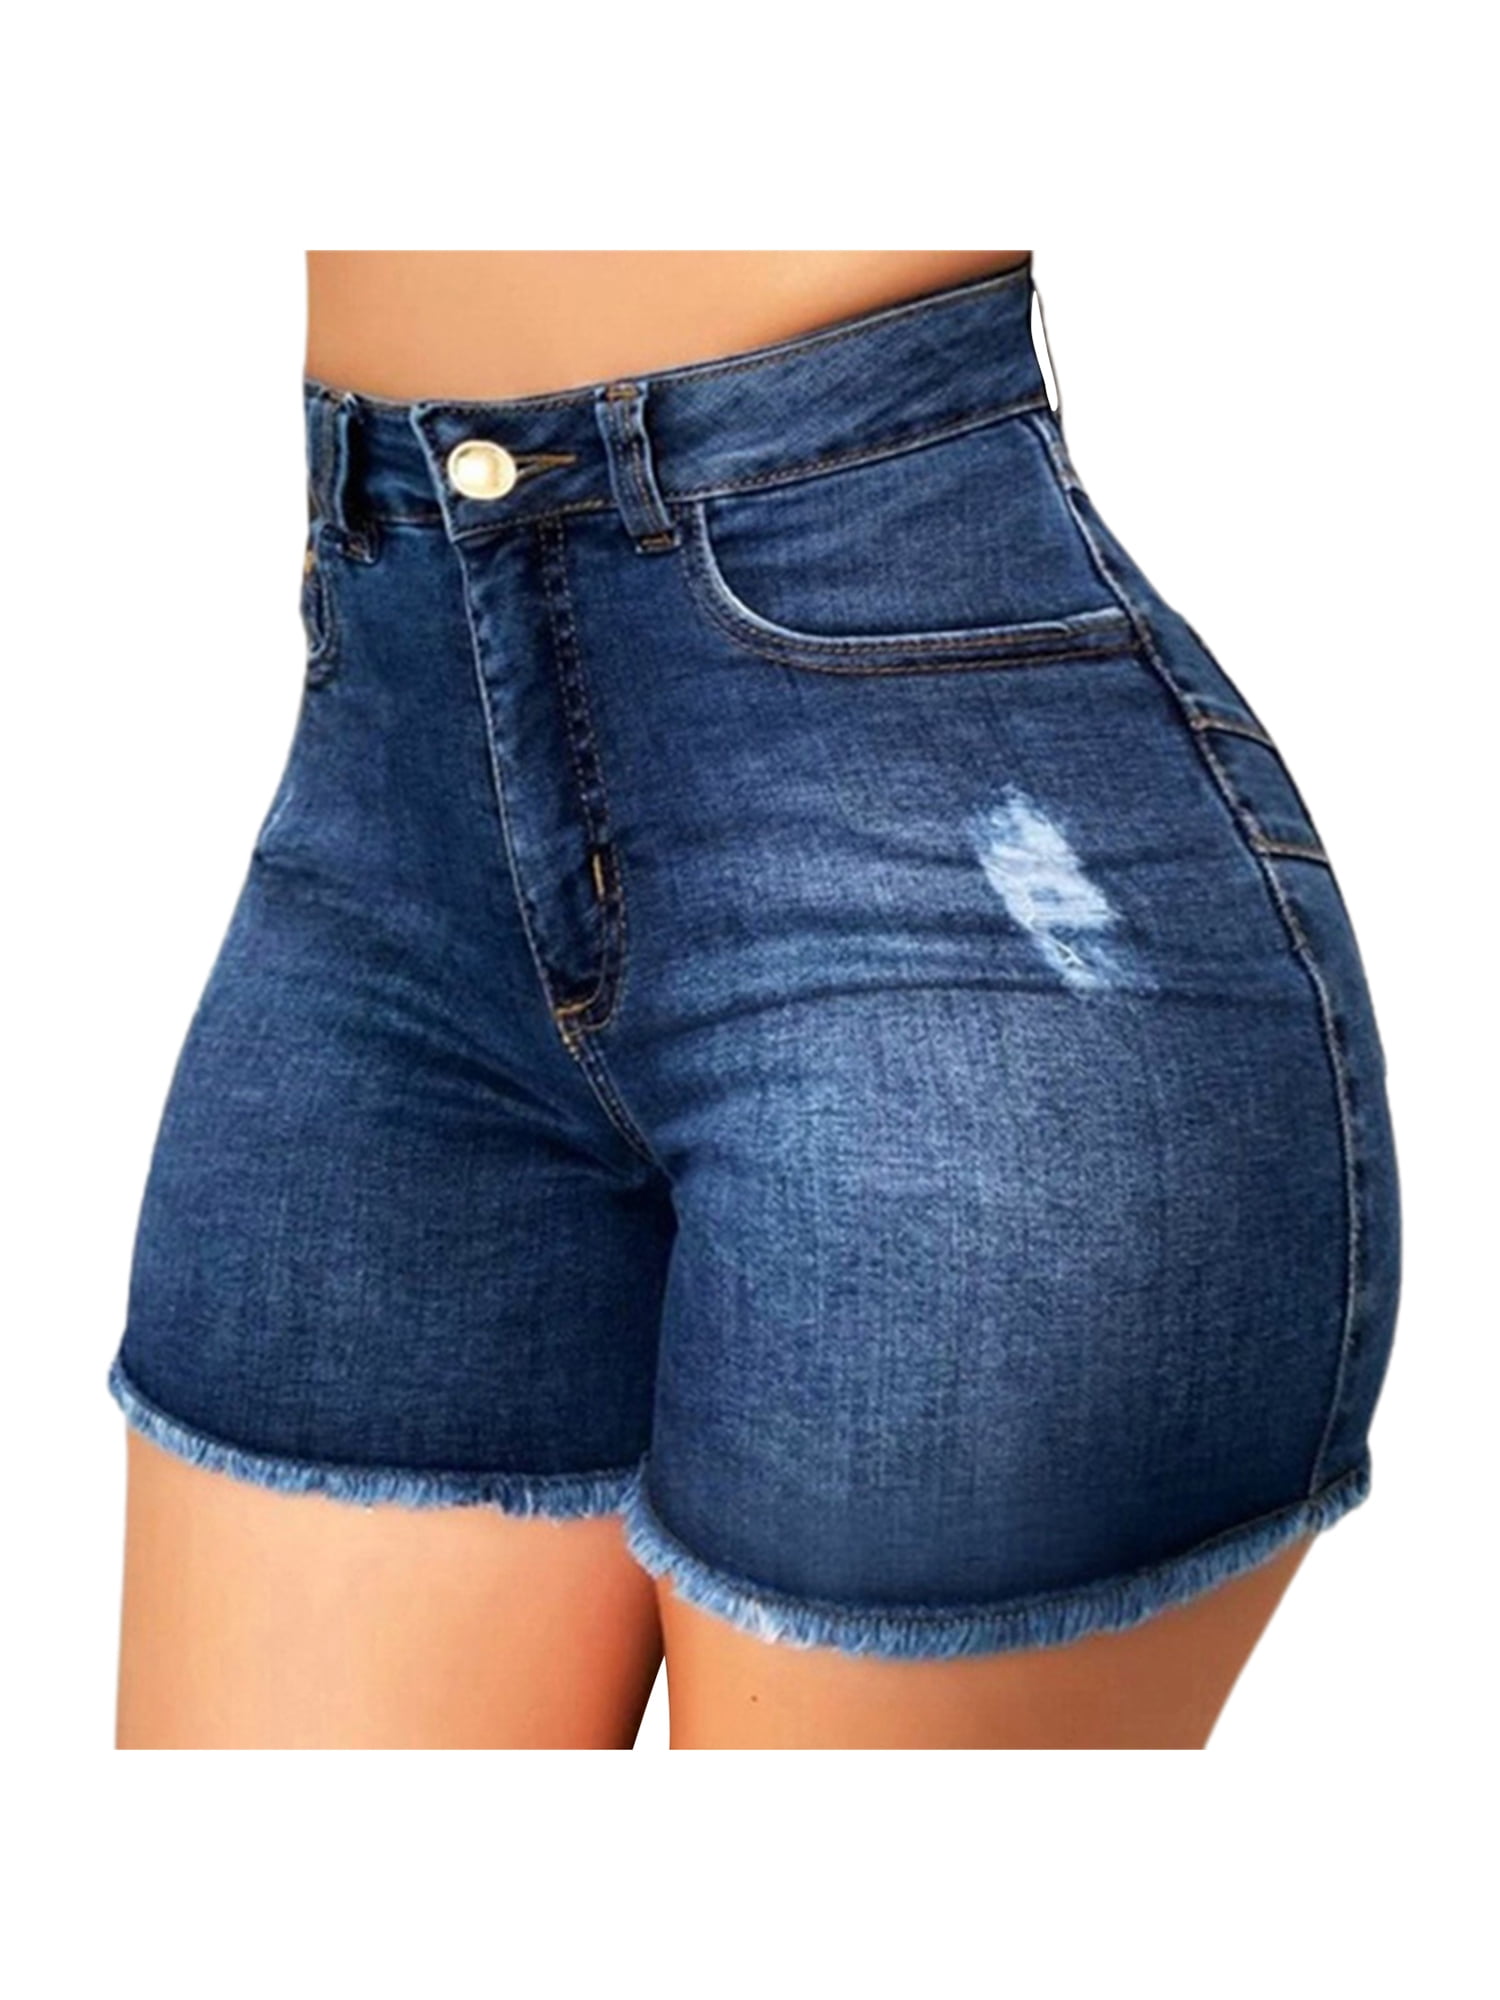 Women Summer Strench Denim Retro High Waisted Slim Shorts Jeans Casual Hot Pant 